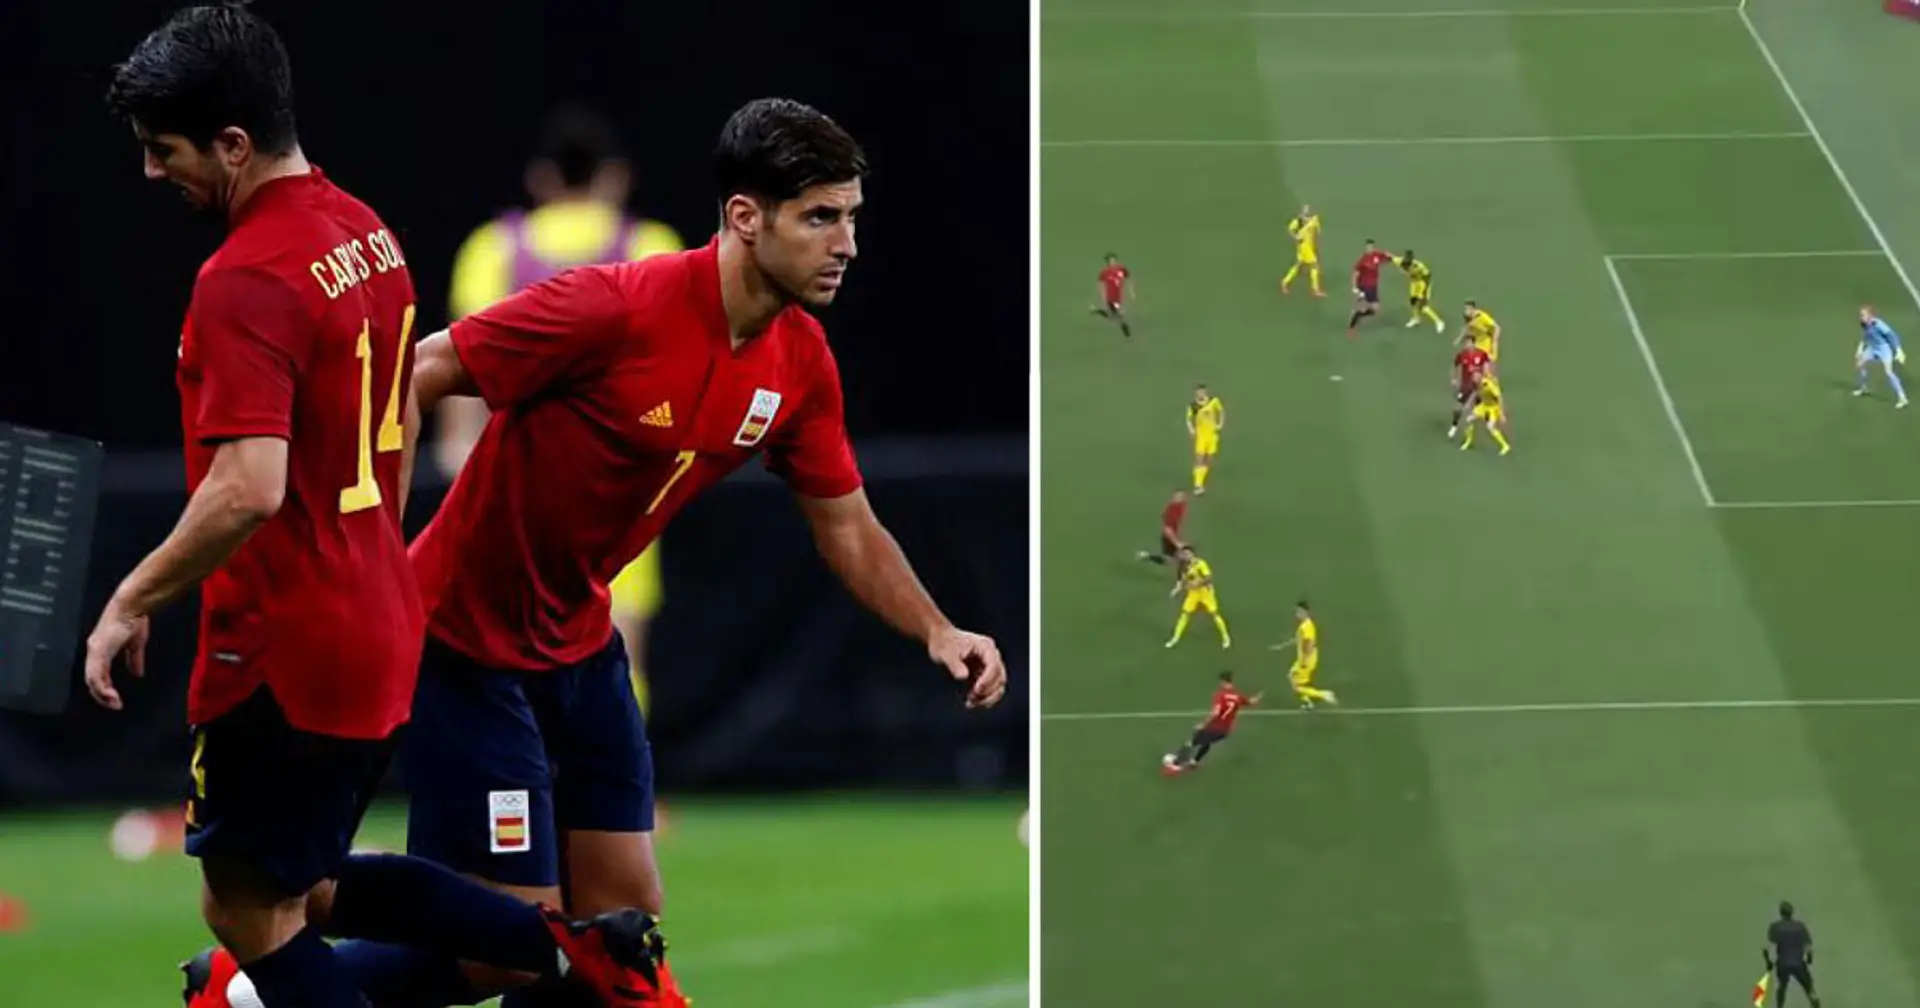 Asensio comes off the bench and provides game-winning assist as Spain beat Australia at Olympics